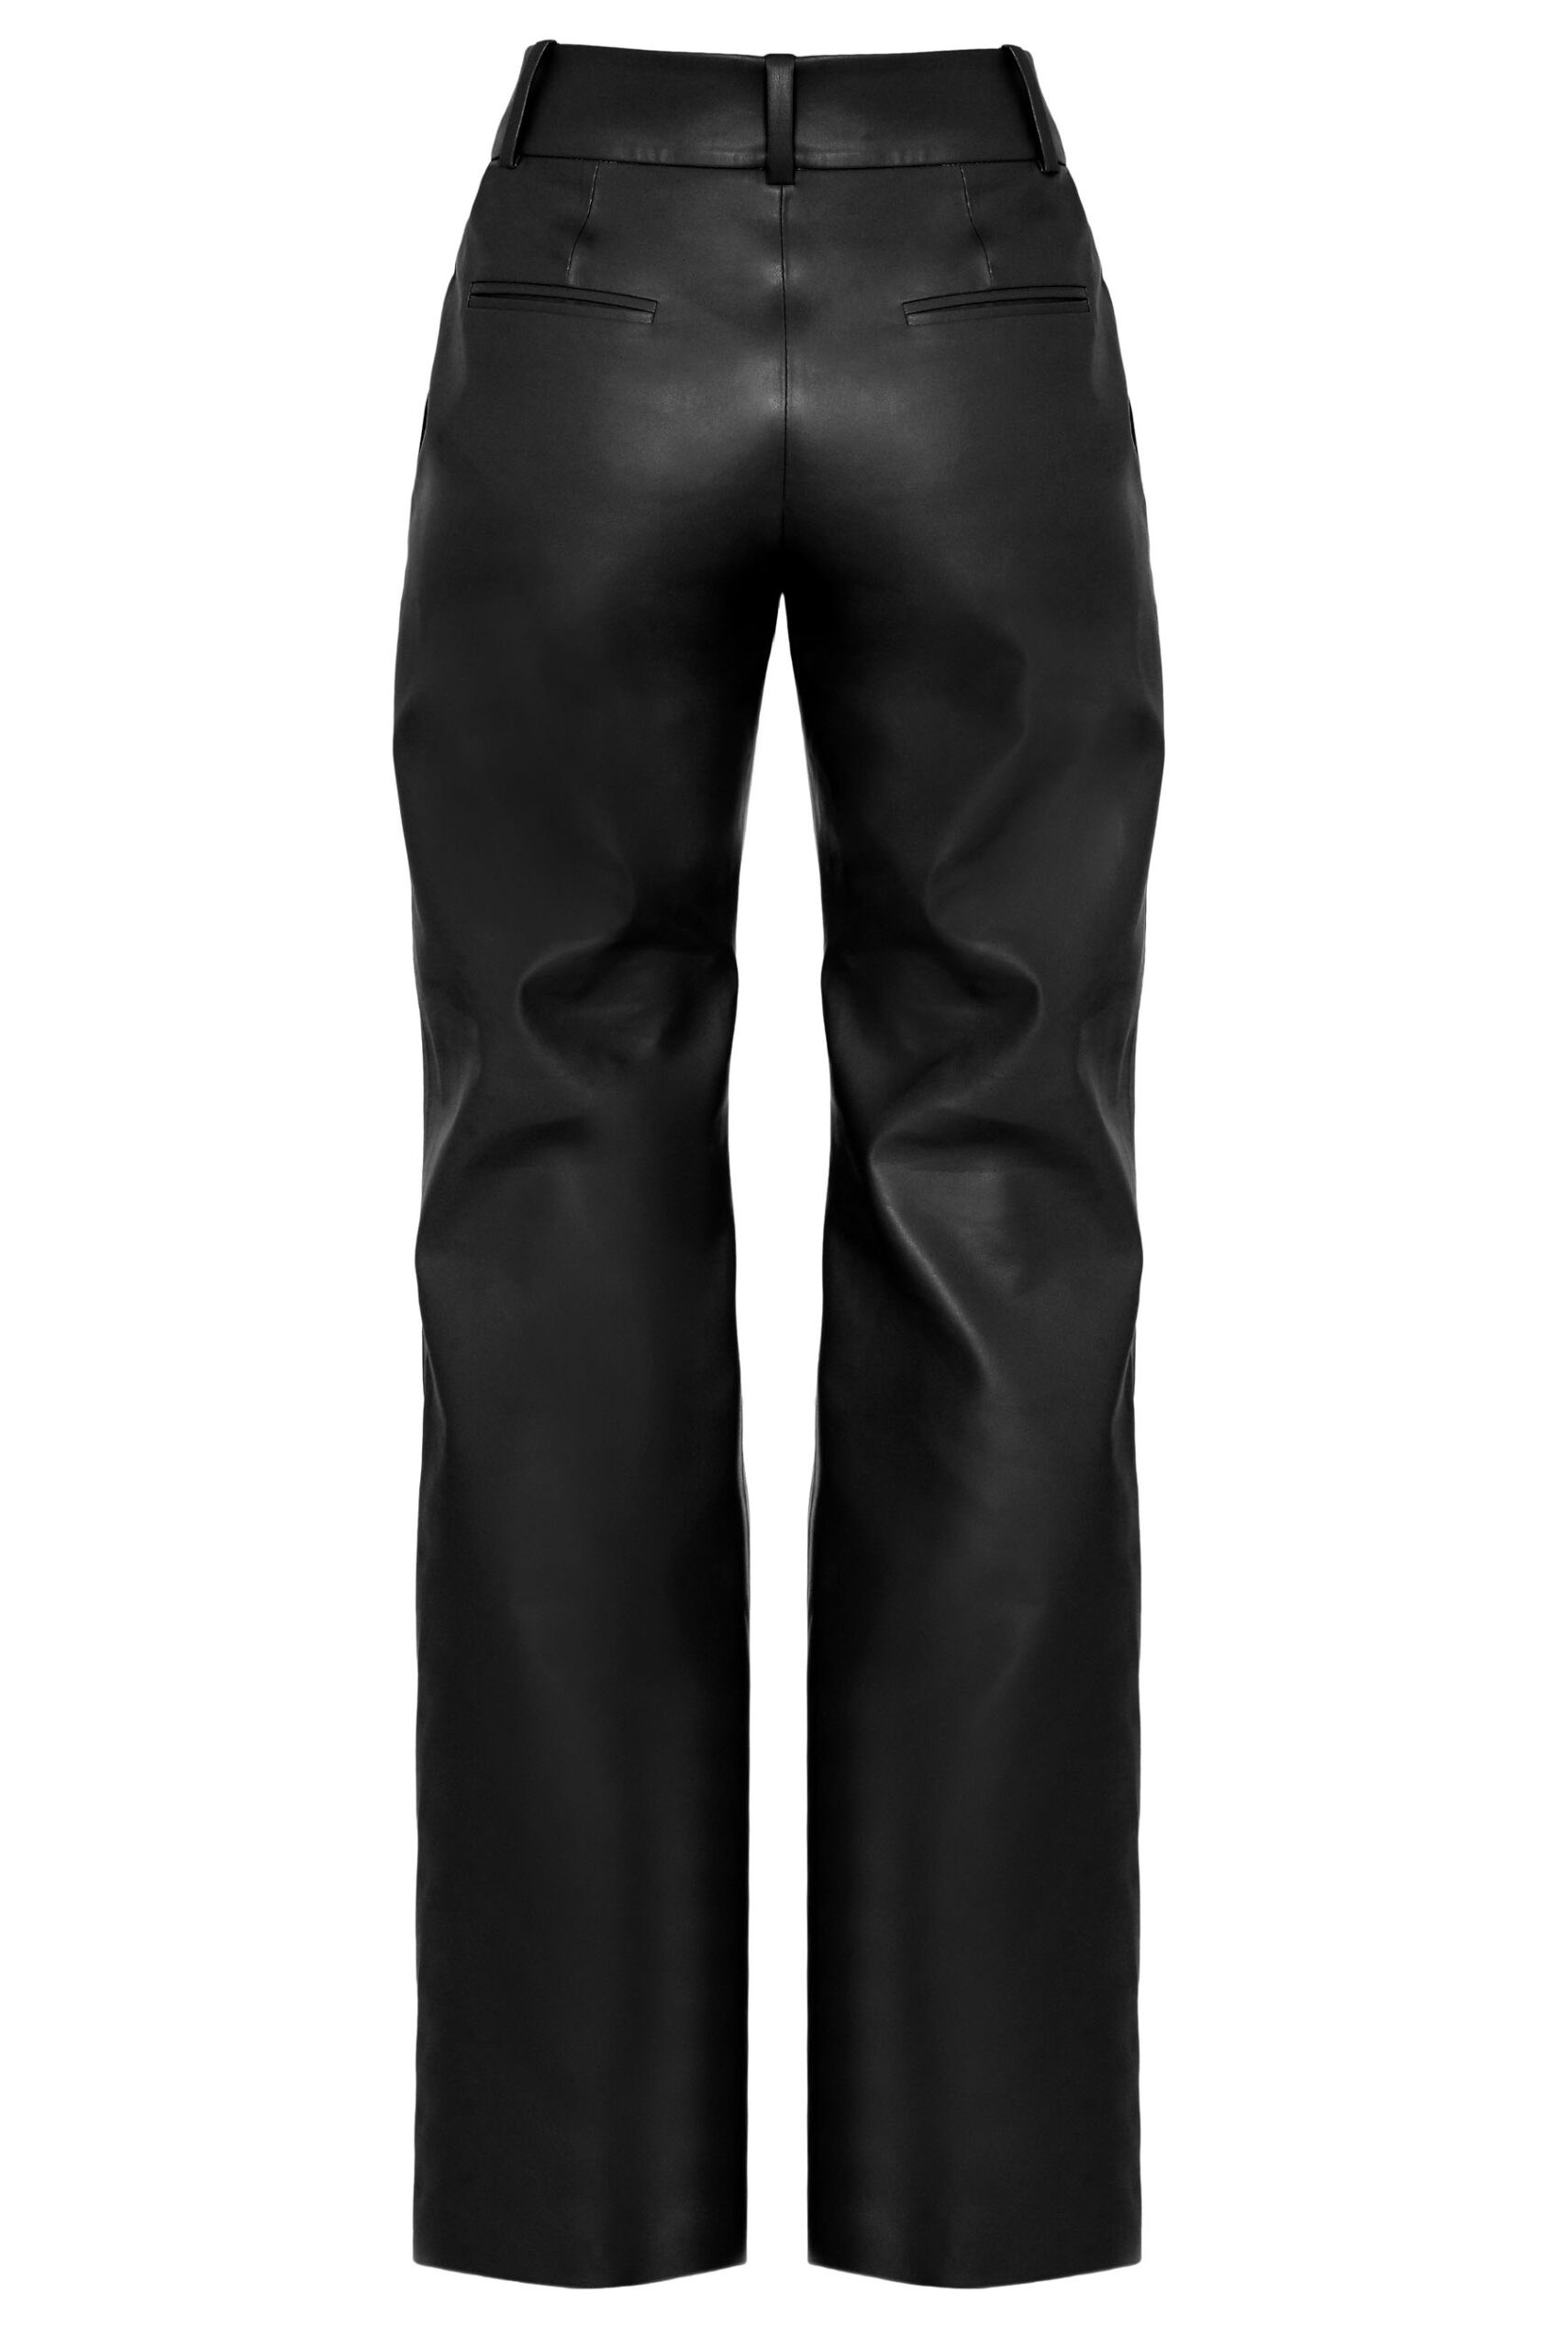 Men's Crinkle Faux Leather Pants Laser Holographic Shiny Stage Punk PU  Trousers